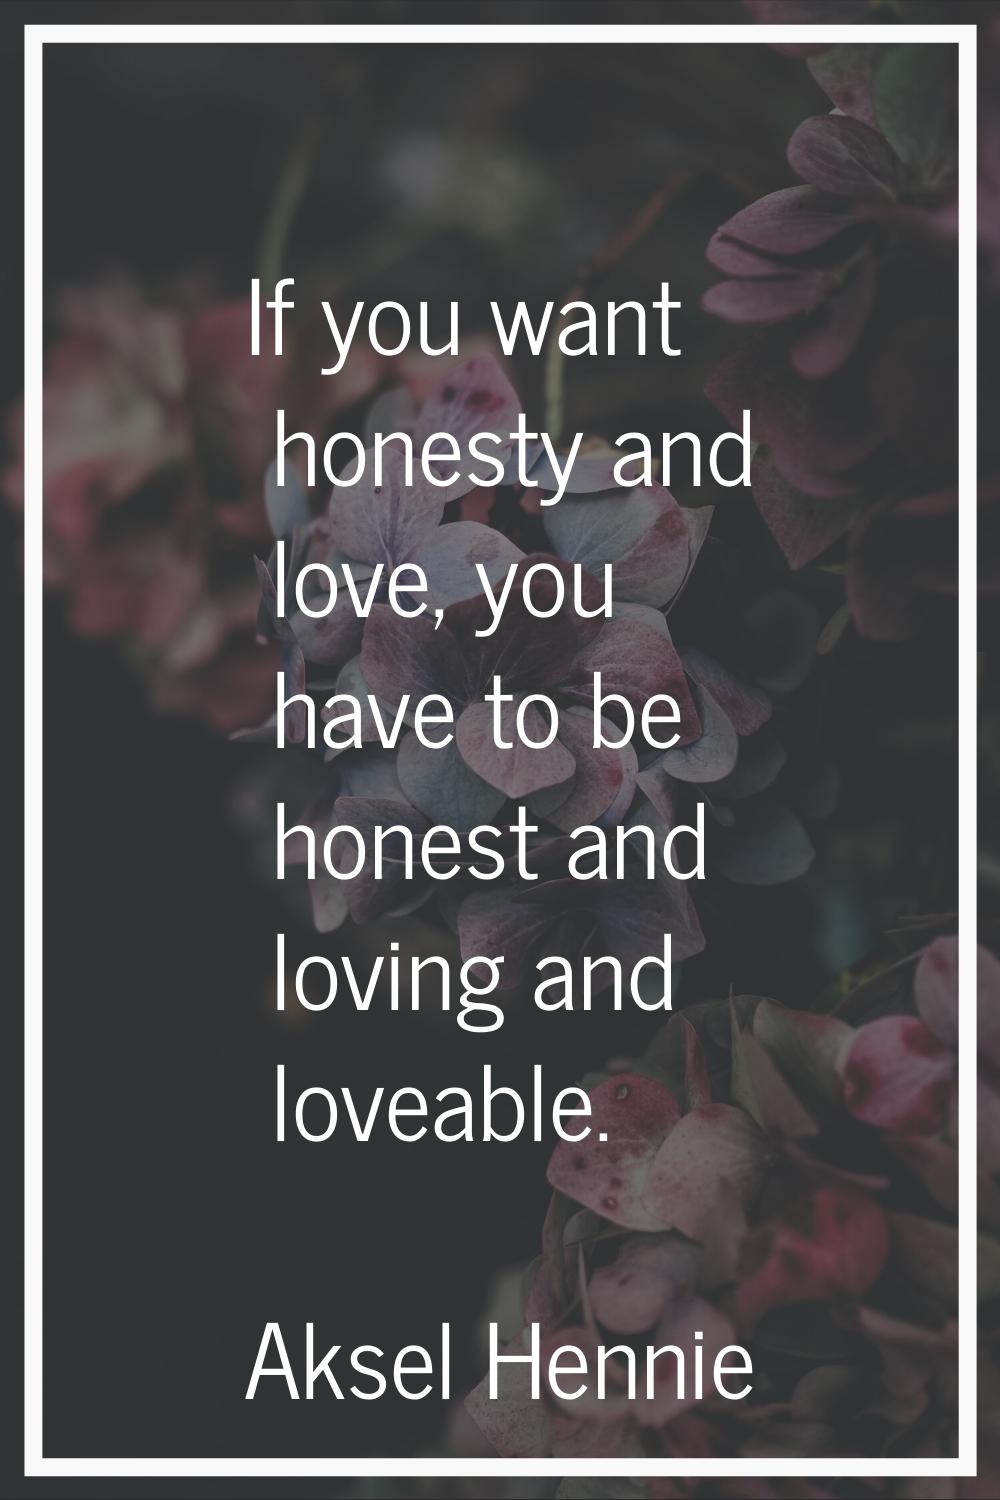 If you want honesty and love, you have to be honest and loving and loveable.